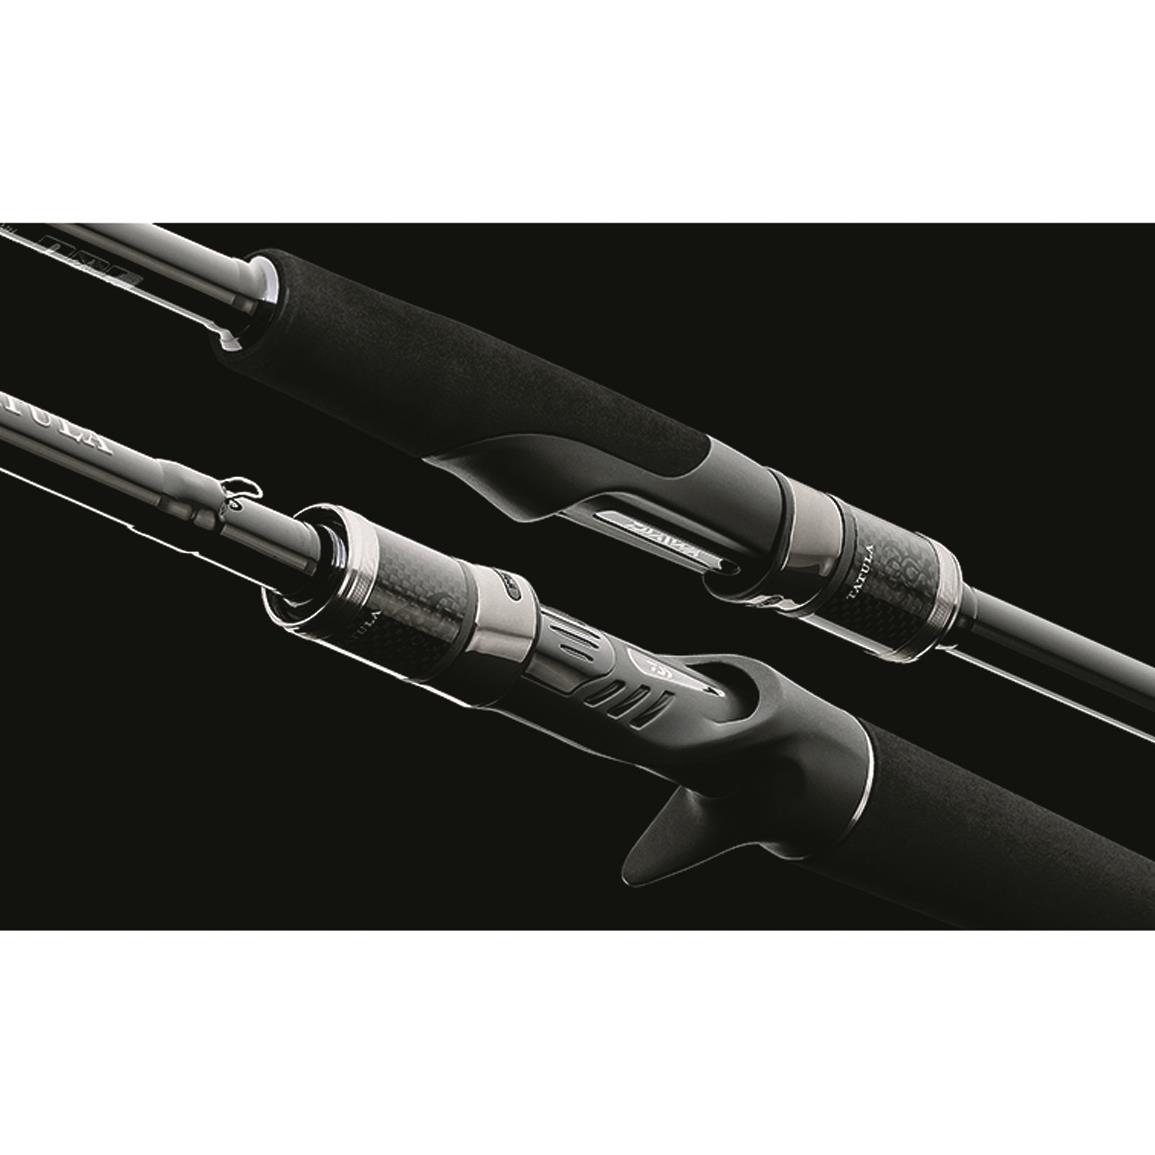 13 Fishing Meta Spinning Rod, 7'2 Length, Medium Heavy Power, Extra Fast  Action - 729854, Spinning Rods at Sportsman's Guide